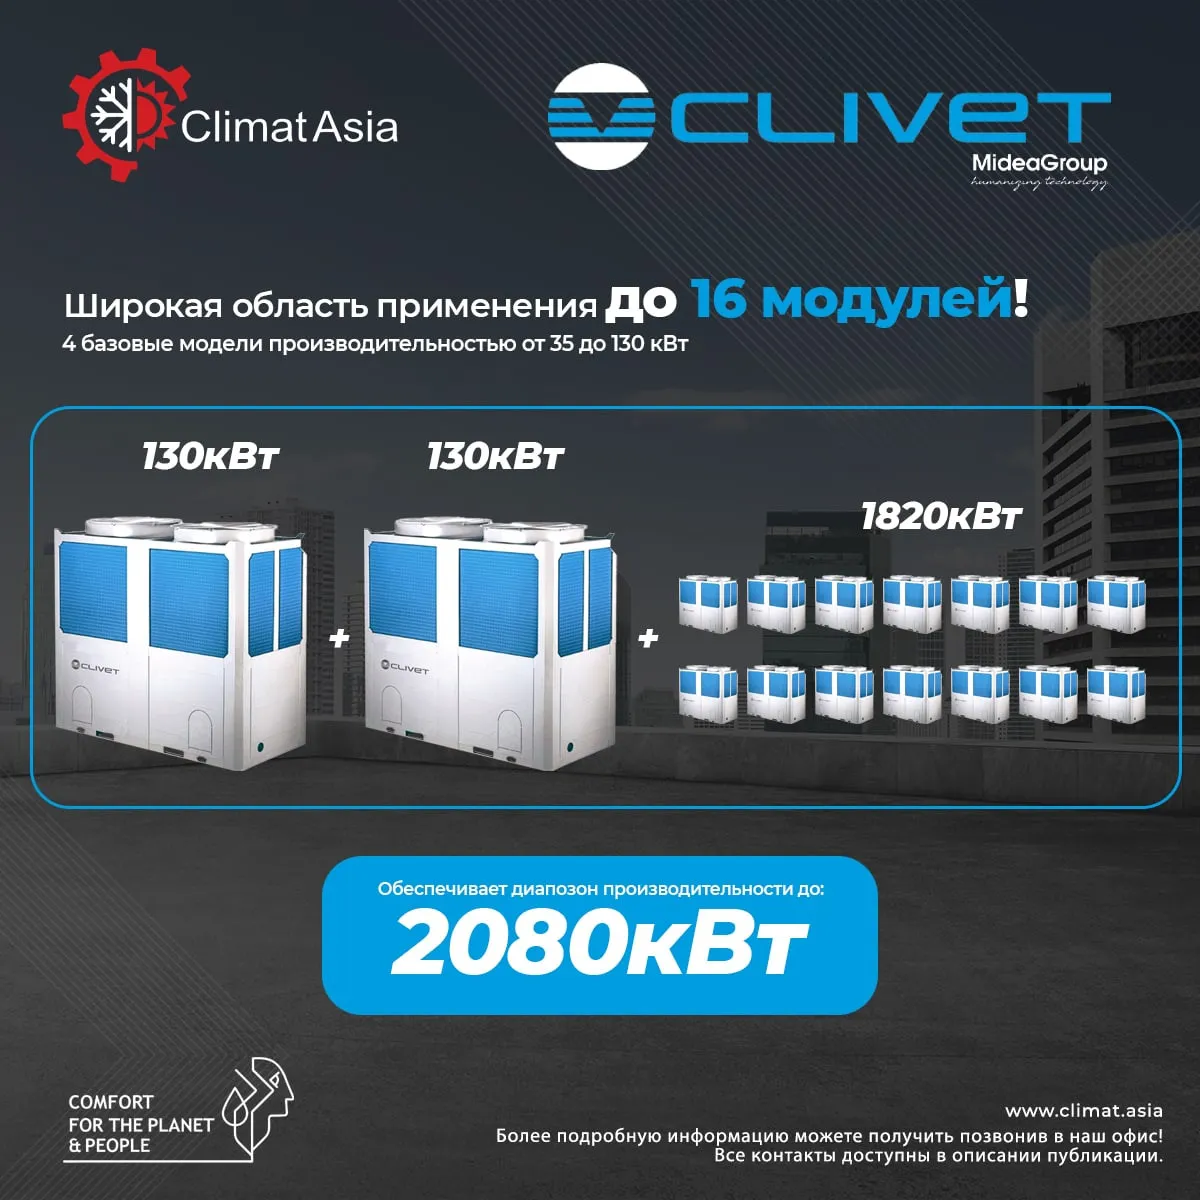 Chiller/chiler 𝐂𝐋𝐈𝐕𝐄𝐓 (A Group Company of Midea) 130кВт#2